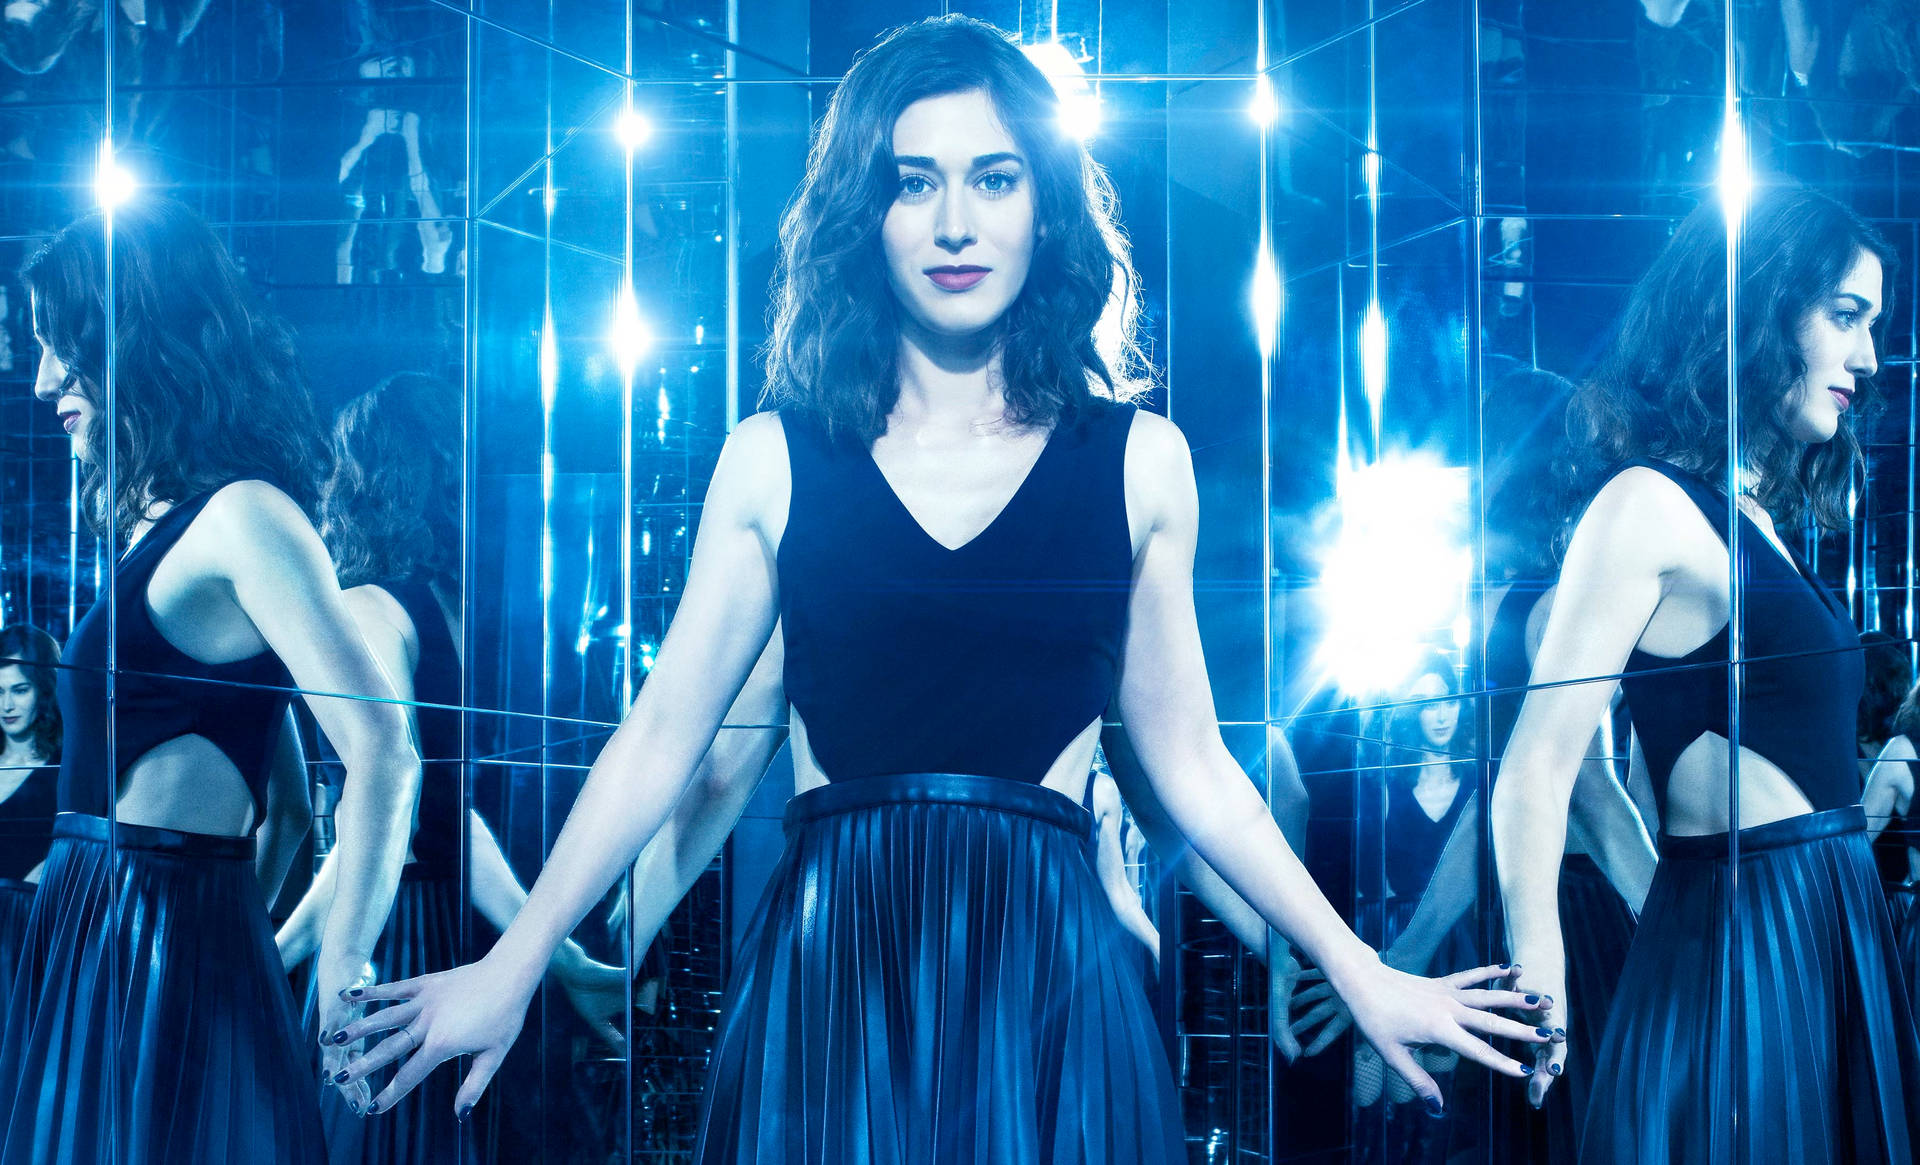 Lizzy Caplan In Now You See Me 2 Wallpaper